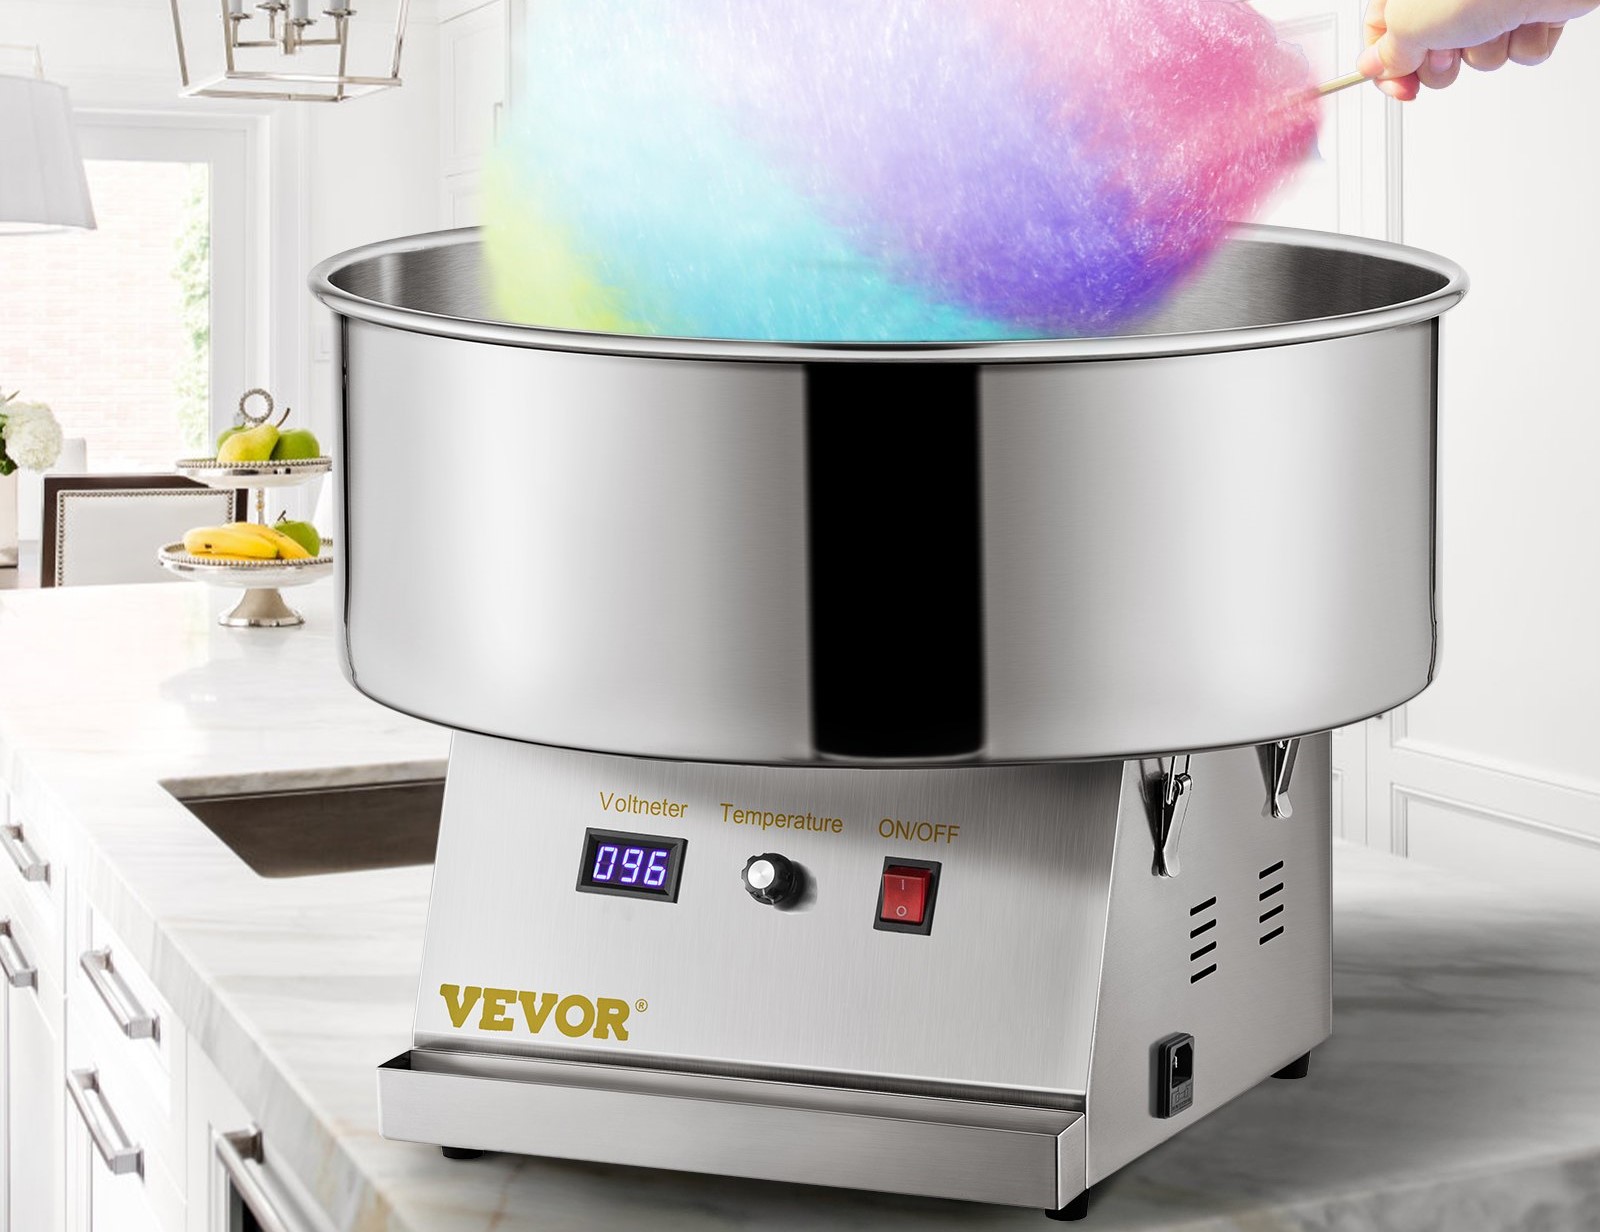 How To Use VEVOR Cotton Candy Machine